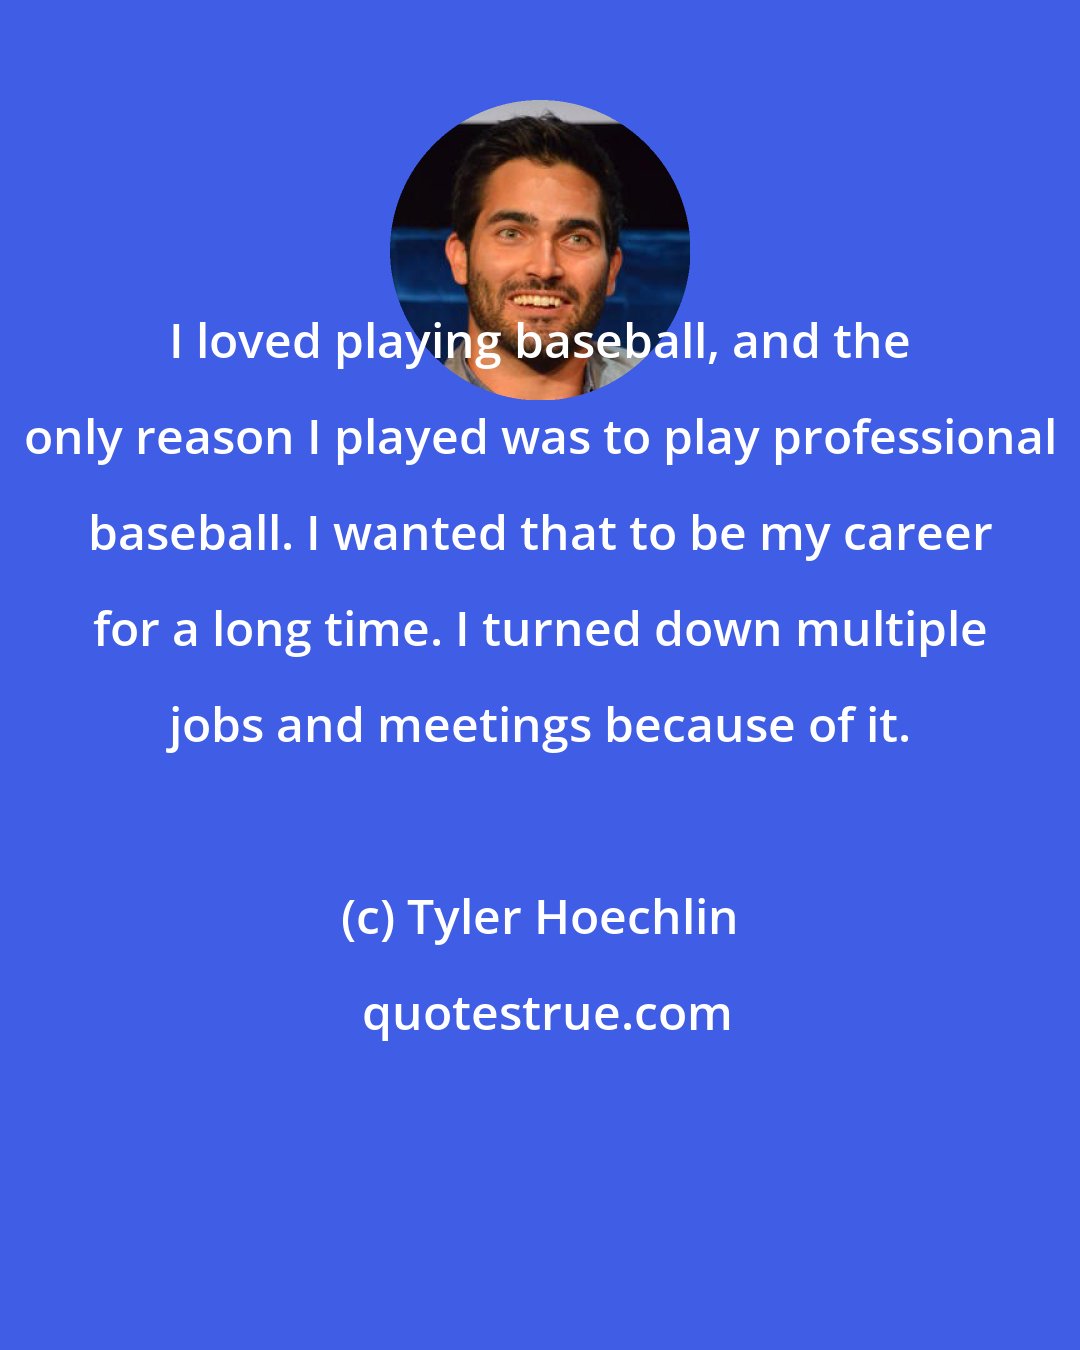 Tyler Hoechlin: I loved playing baseball, and the only reason I played was to play professional baseball. I wanted that to be my career for a long time. I turned down multiple jobs and meetings because of it.